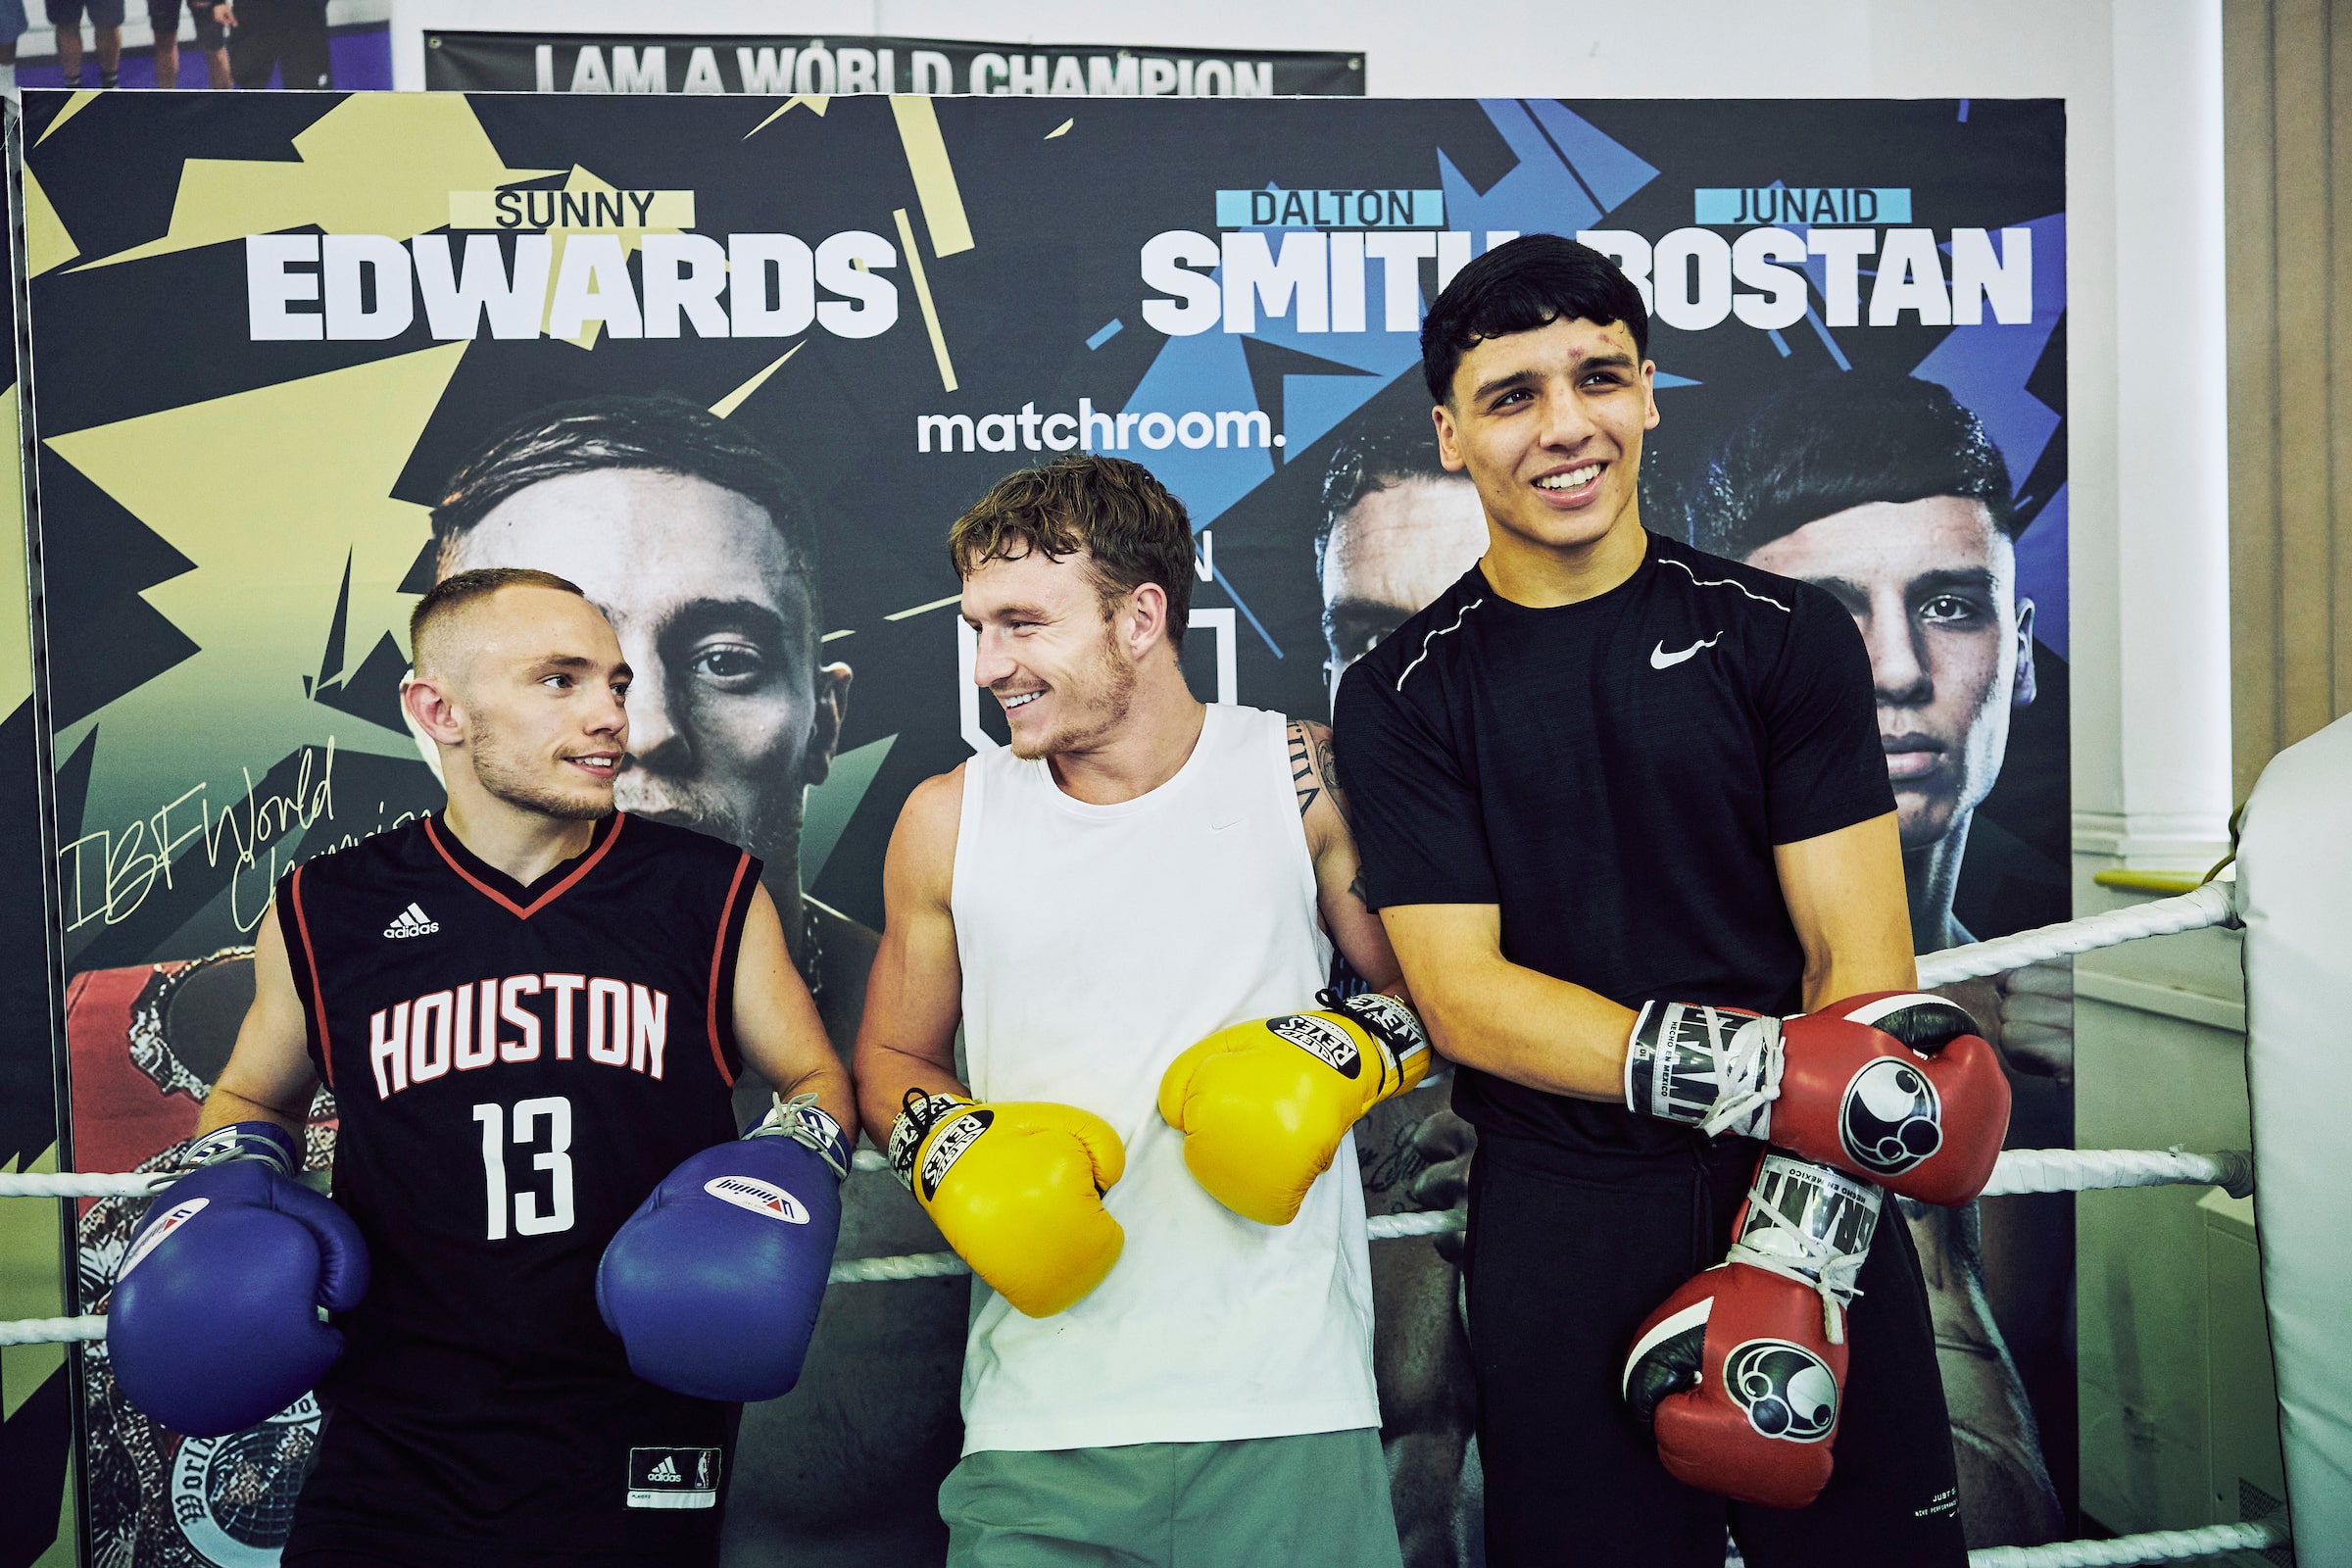 Dalton Smith delighted special stablemate Edwards has landed the Rodirguez fight